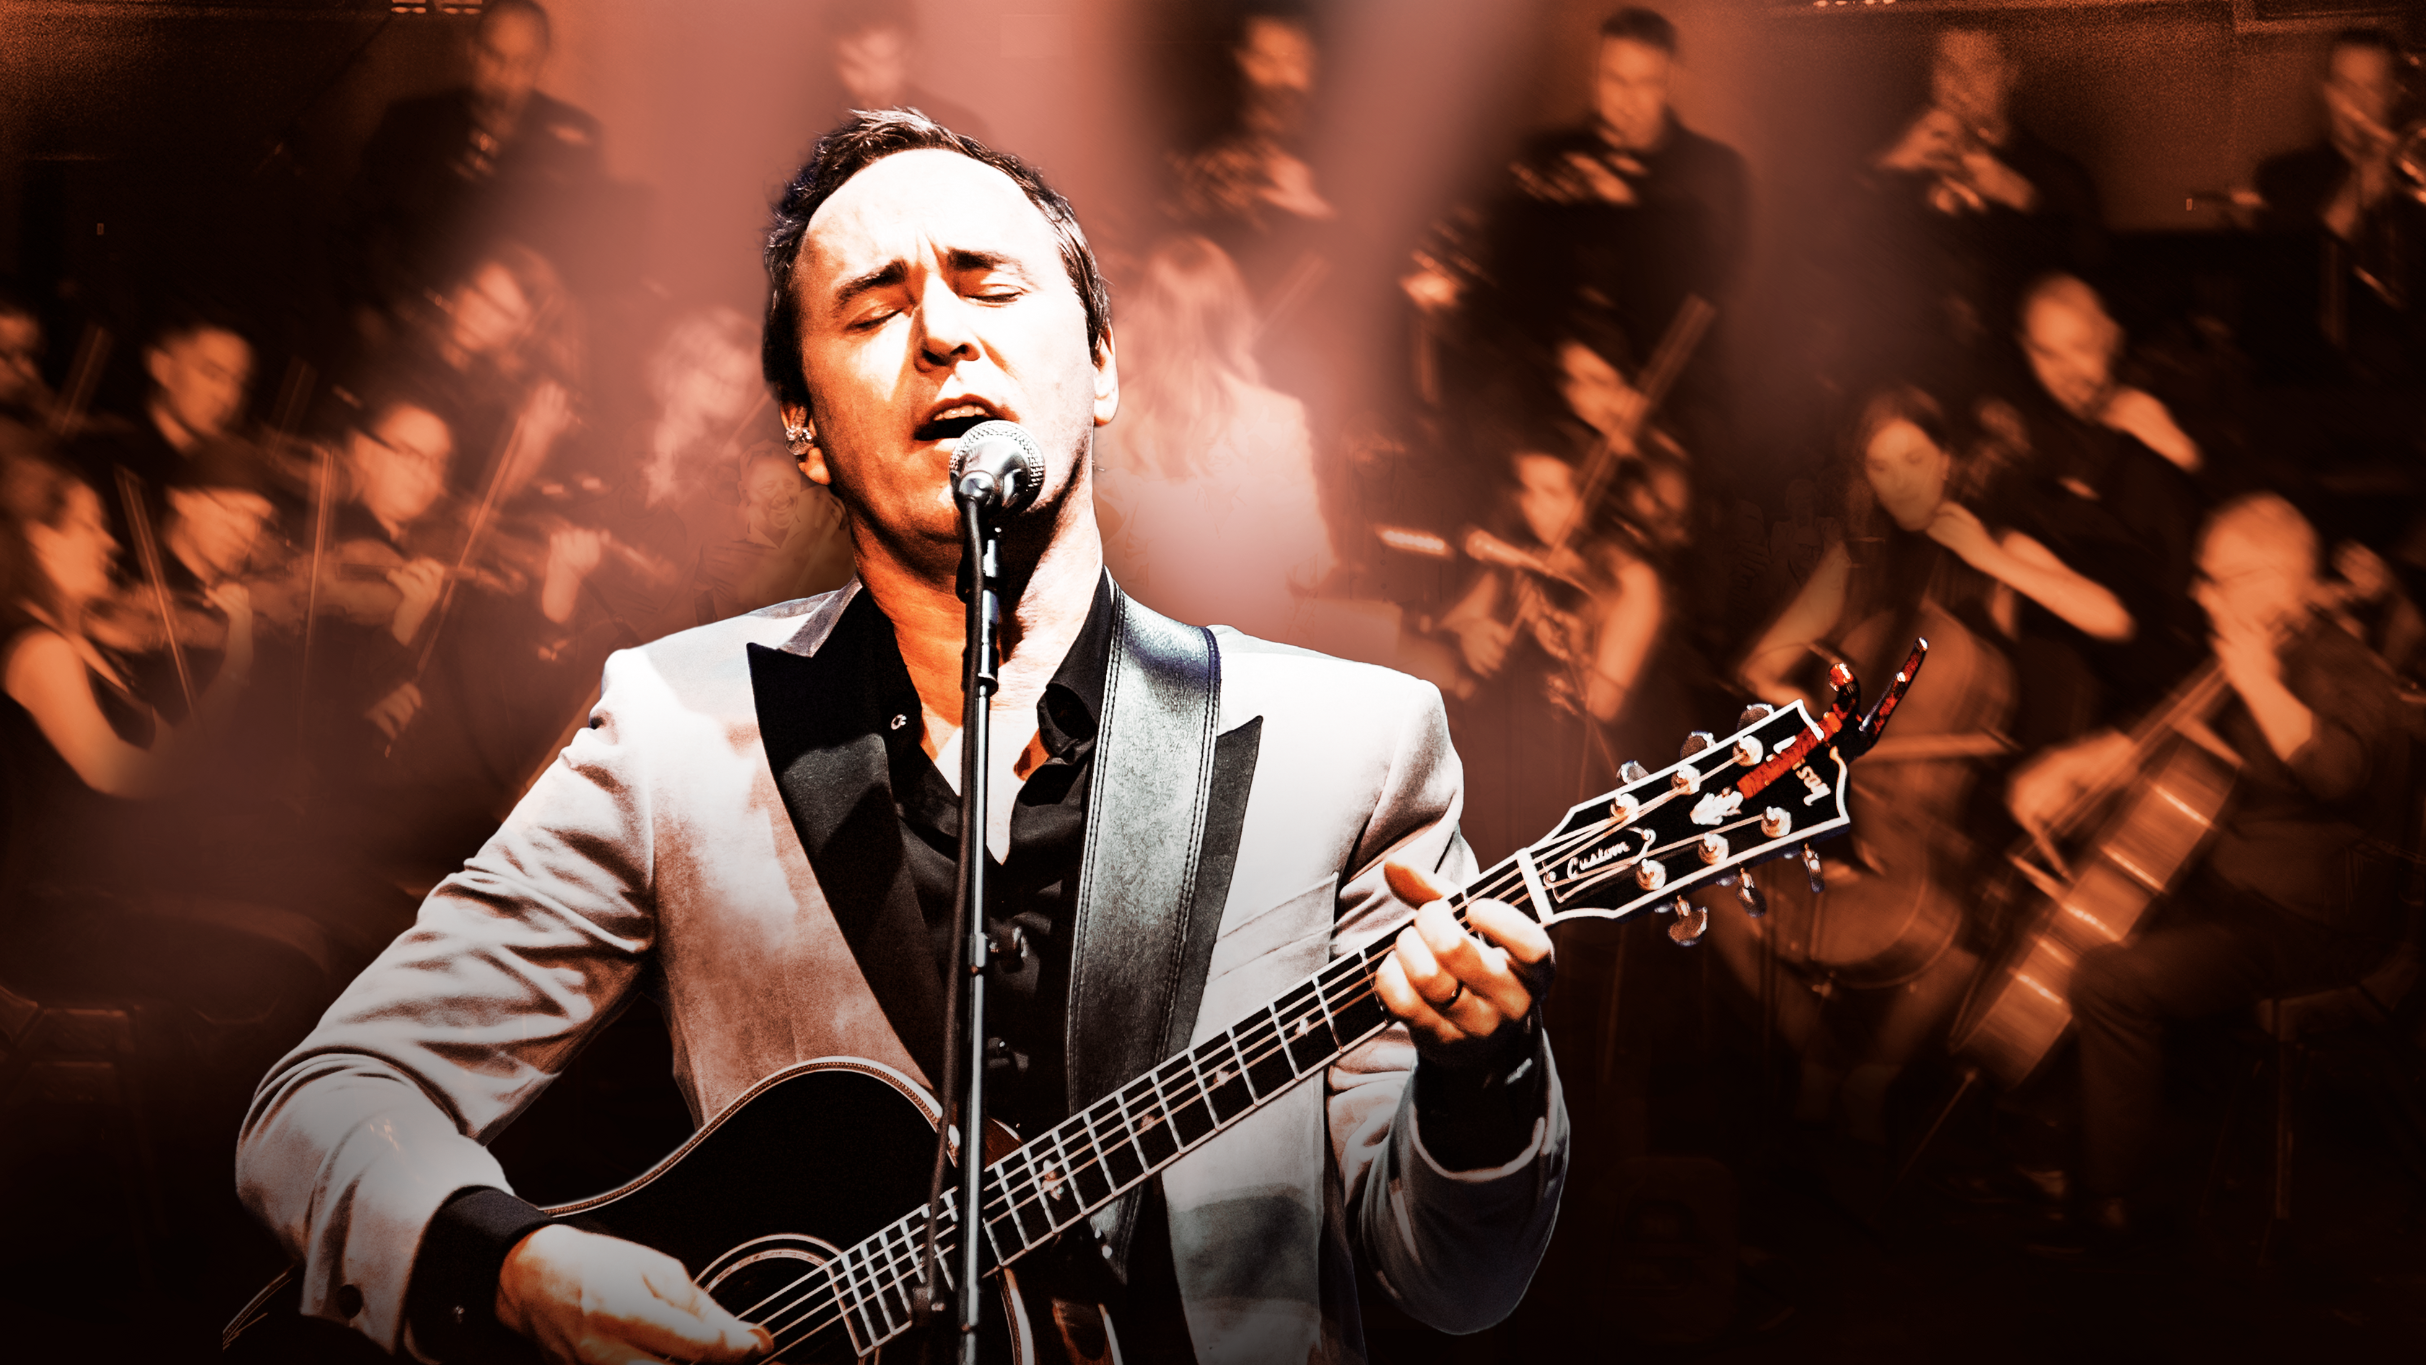 Damien Leith in Concert - "Roy Orbison Orchestrated" in Sandy Bay promo photo for Exclusive presale offer code